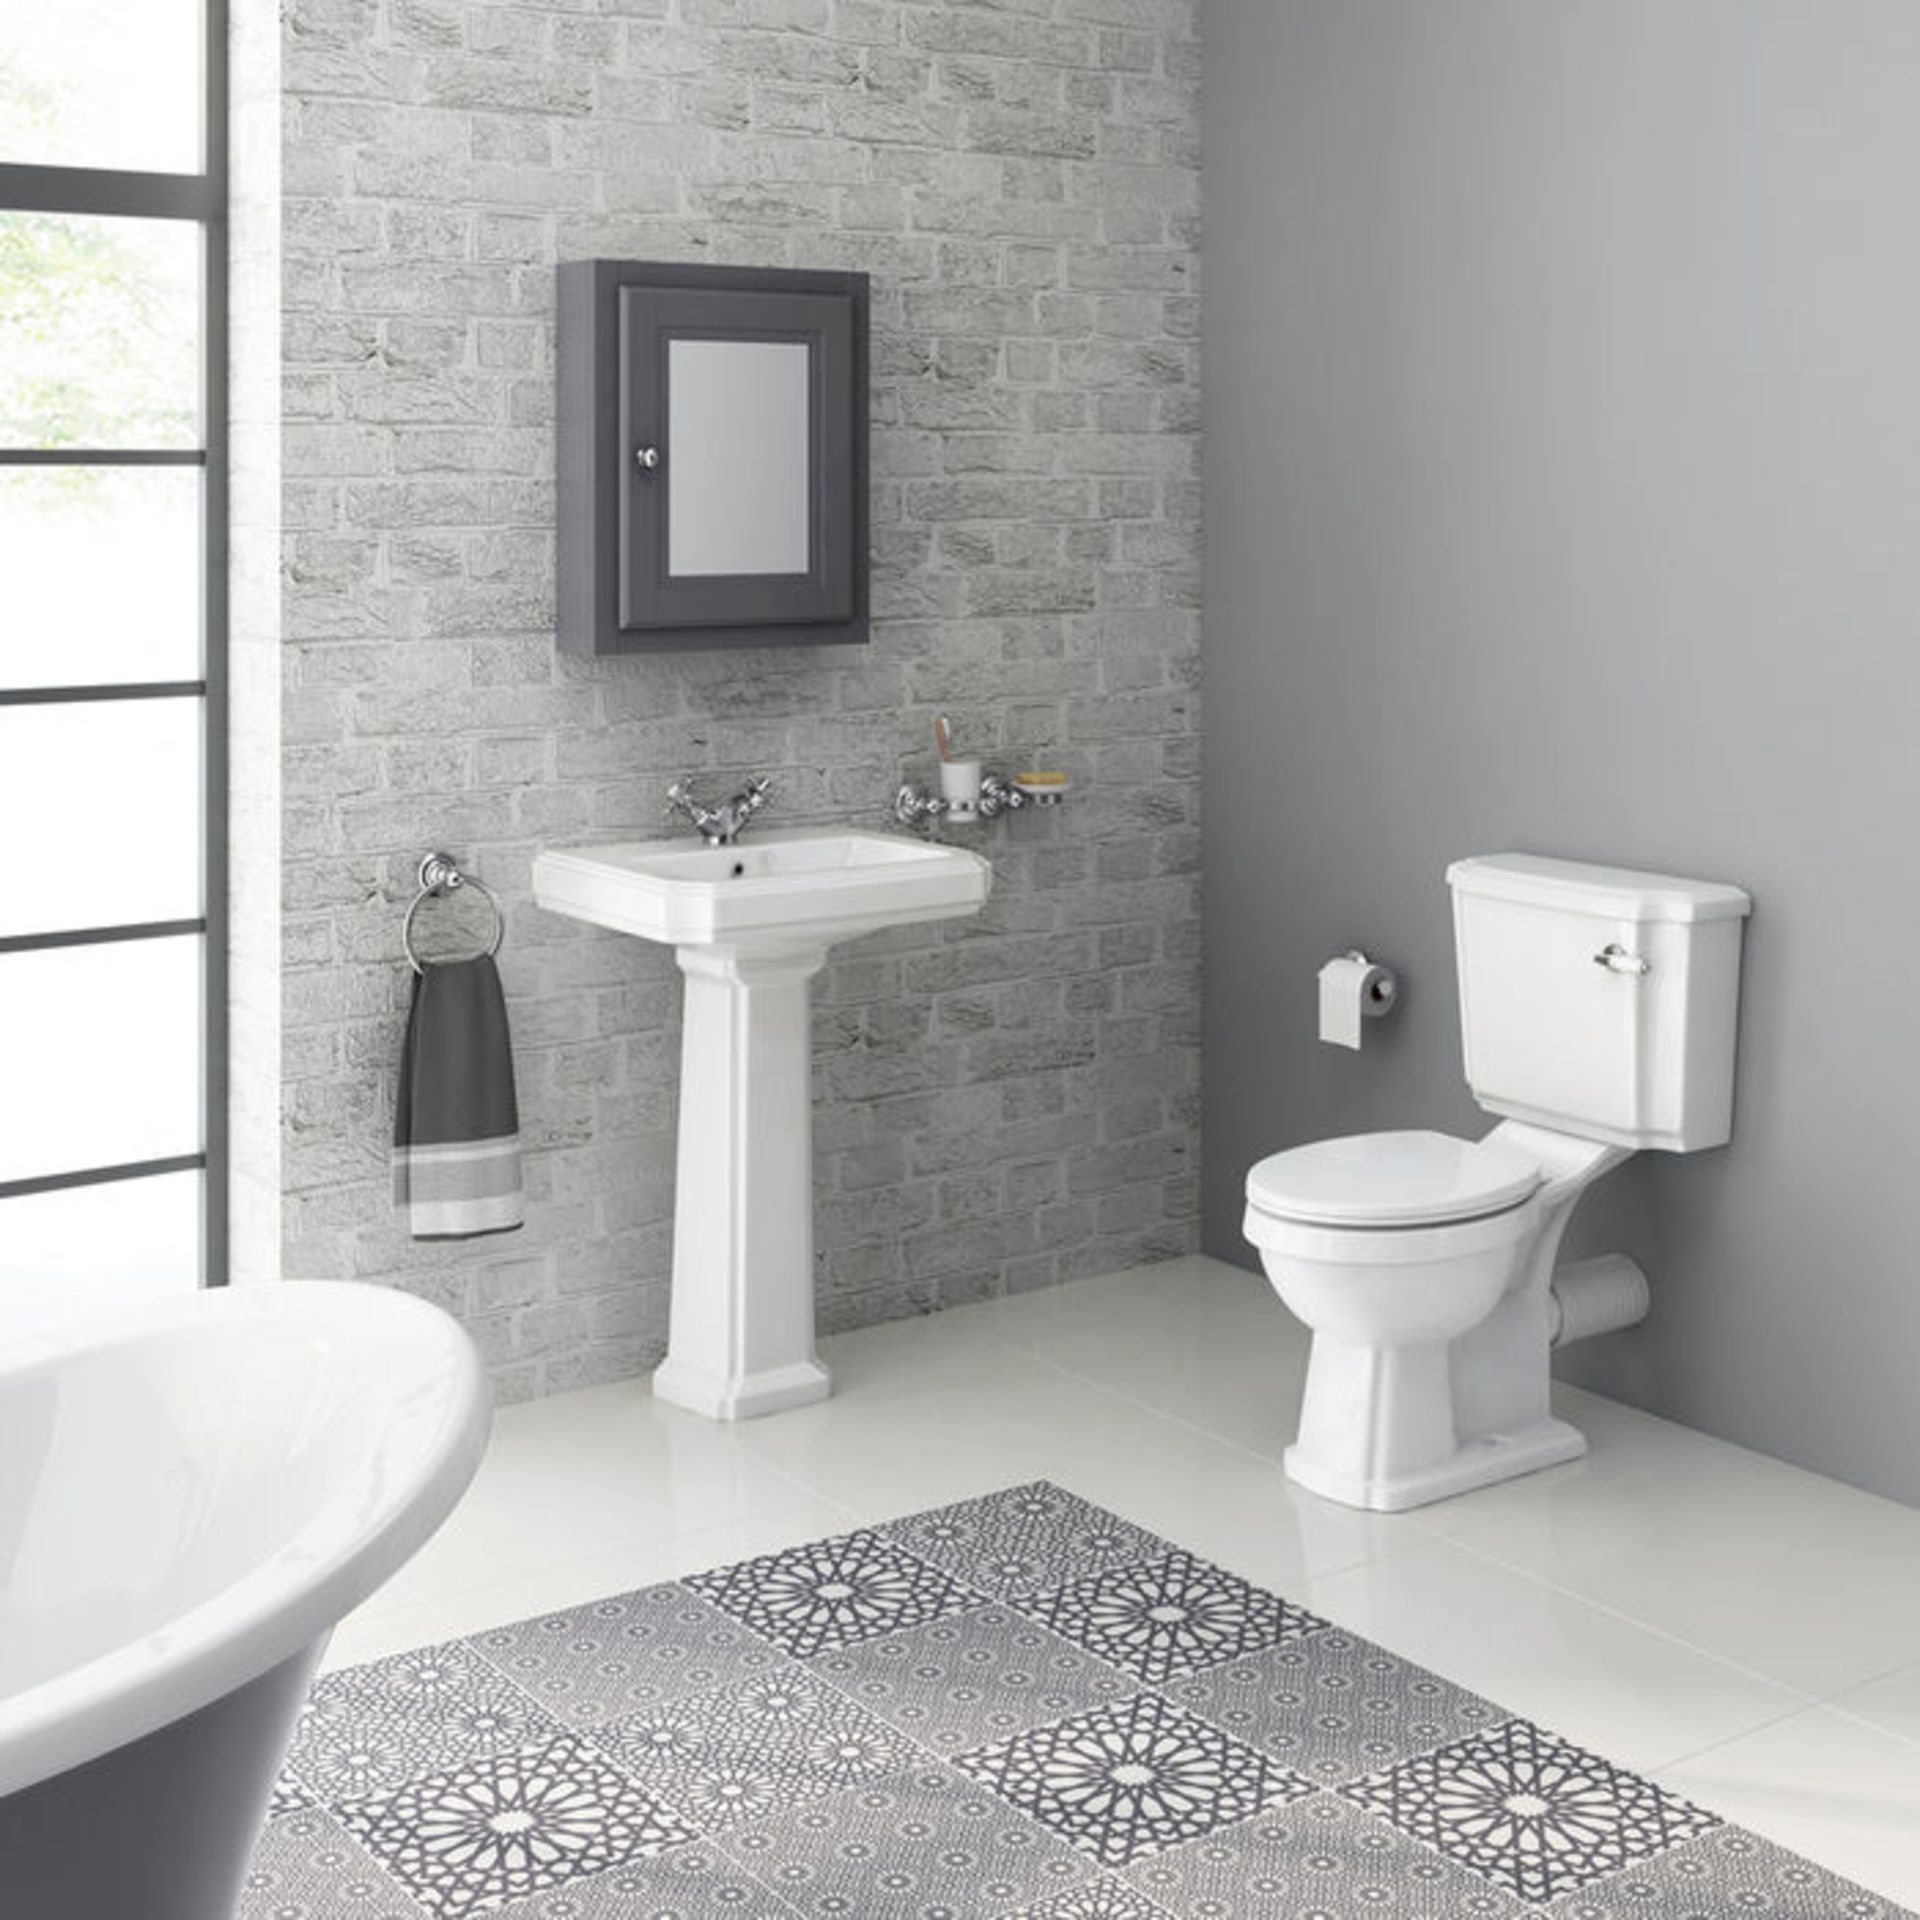 (OS242) Cambridge Traditional Close Coupled Toilet & Cistern - White Seat Traditional features add - Image 4 of 4